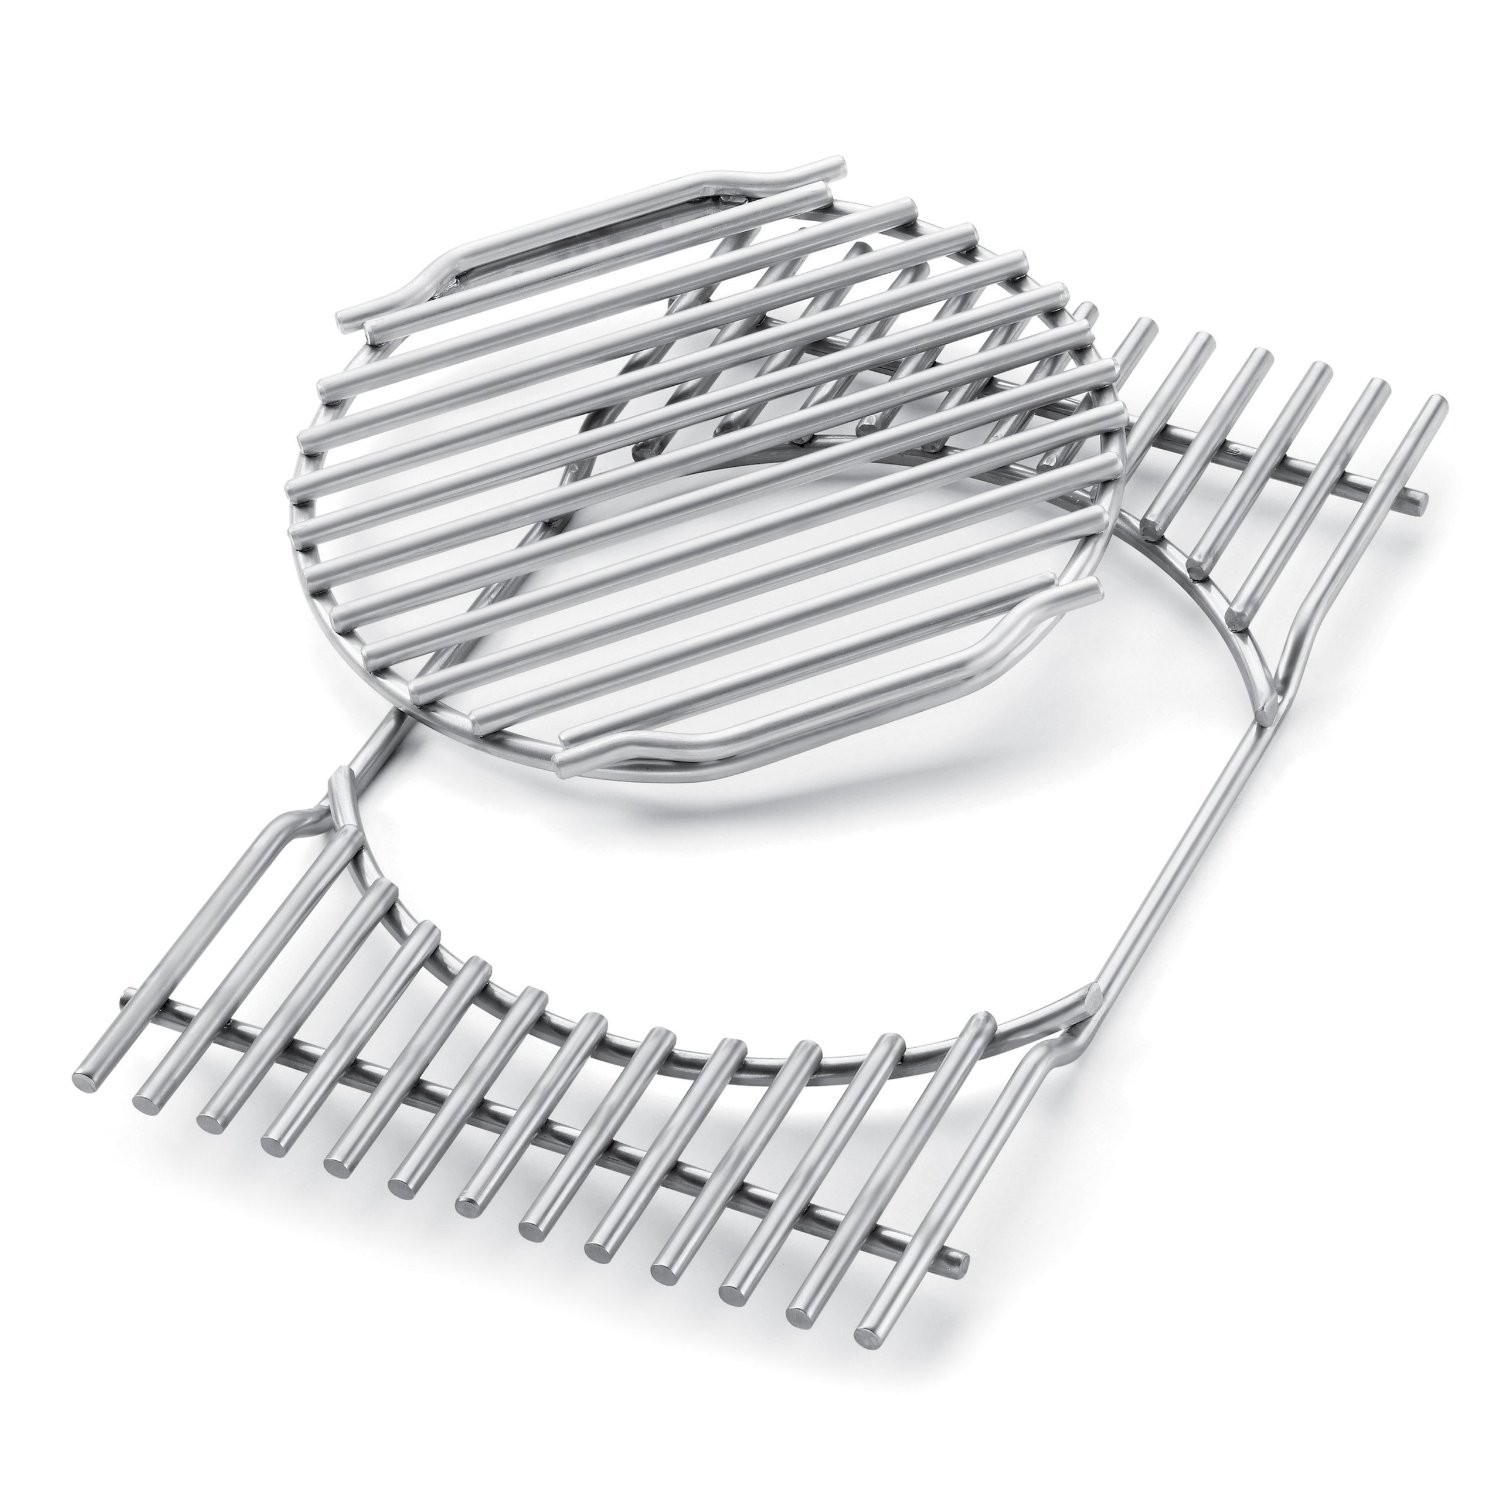 How To Get Stainless Steel Cooking Grates Looking My Wallpaper